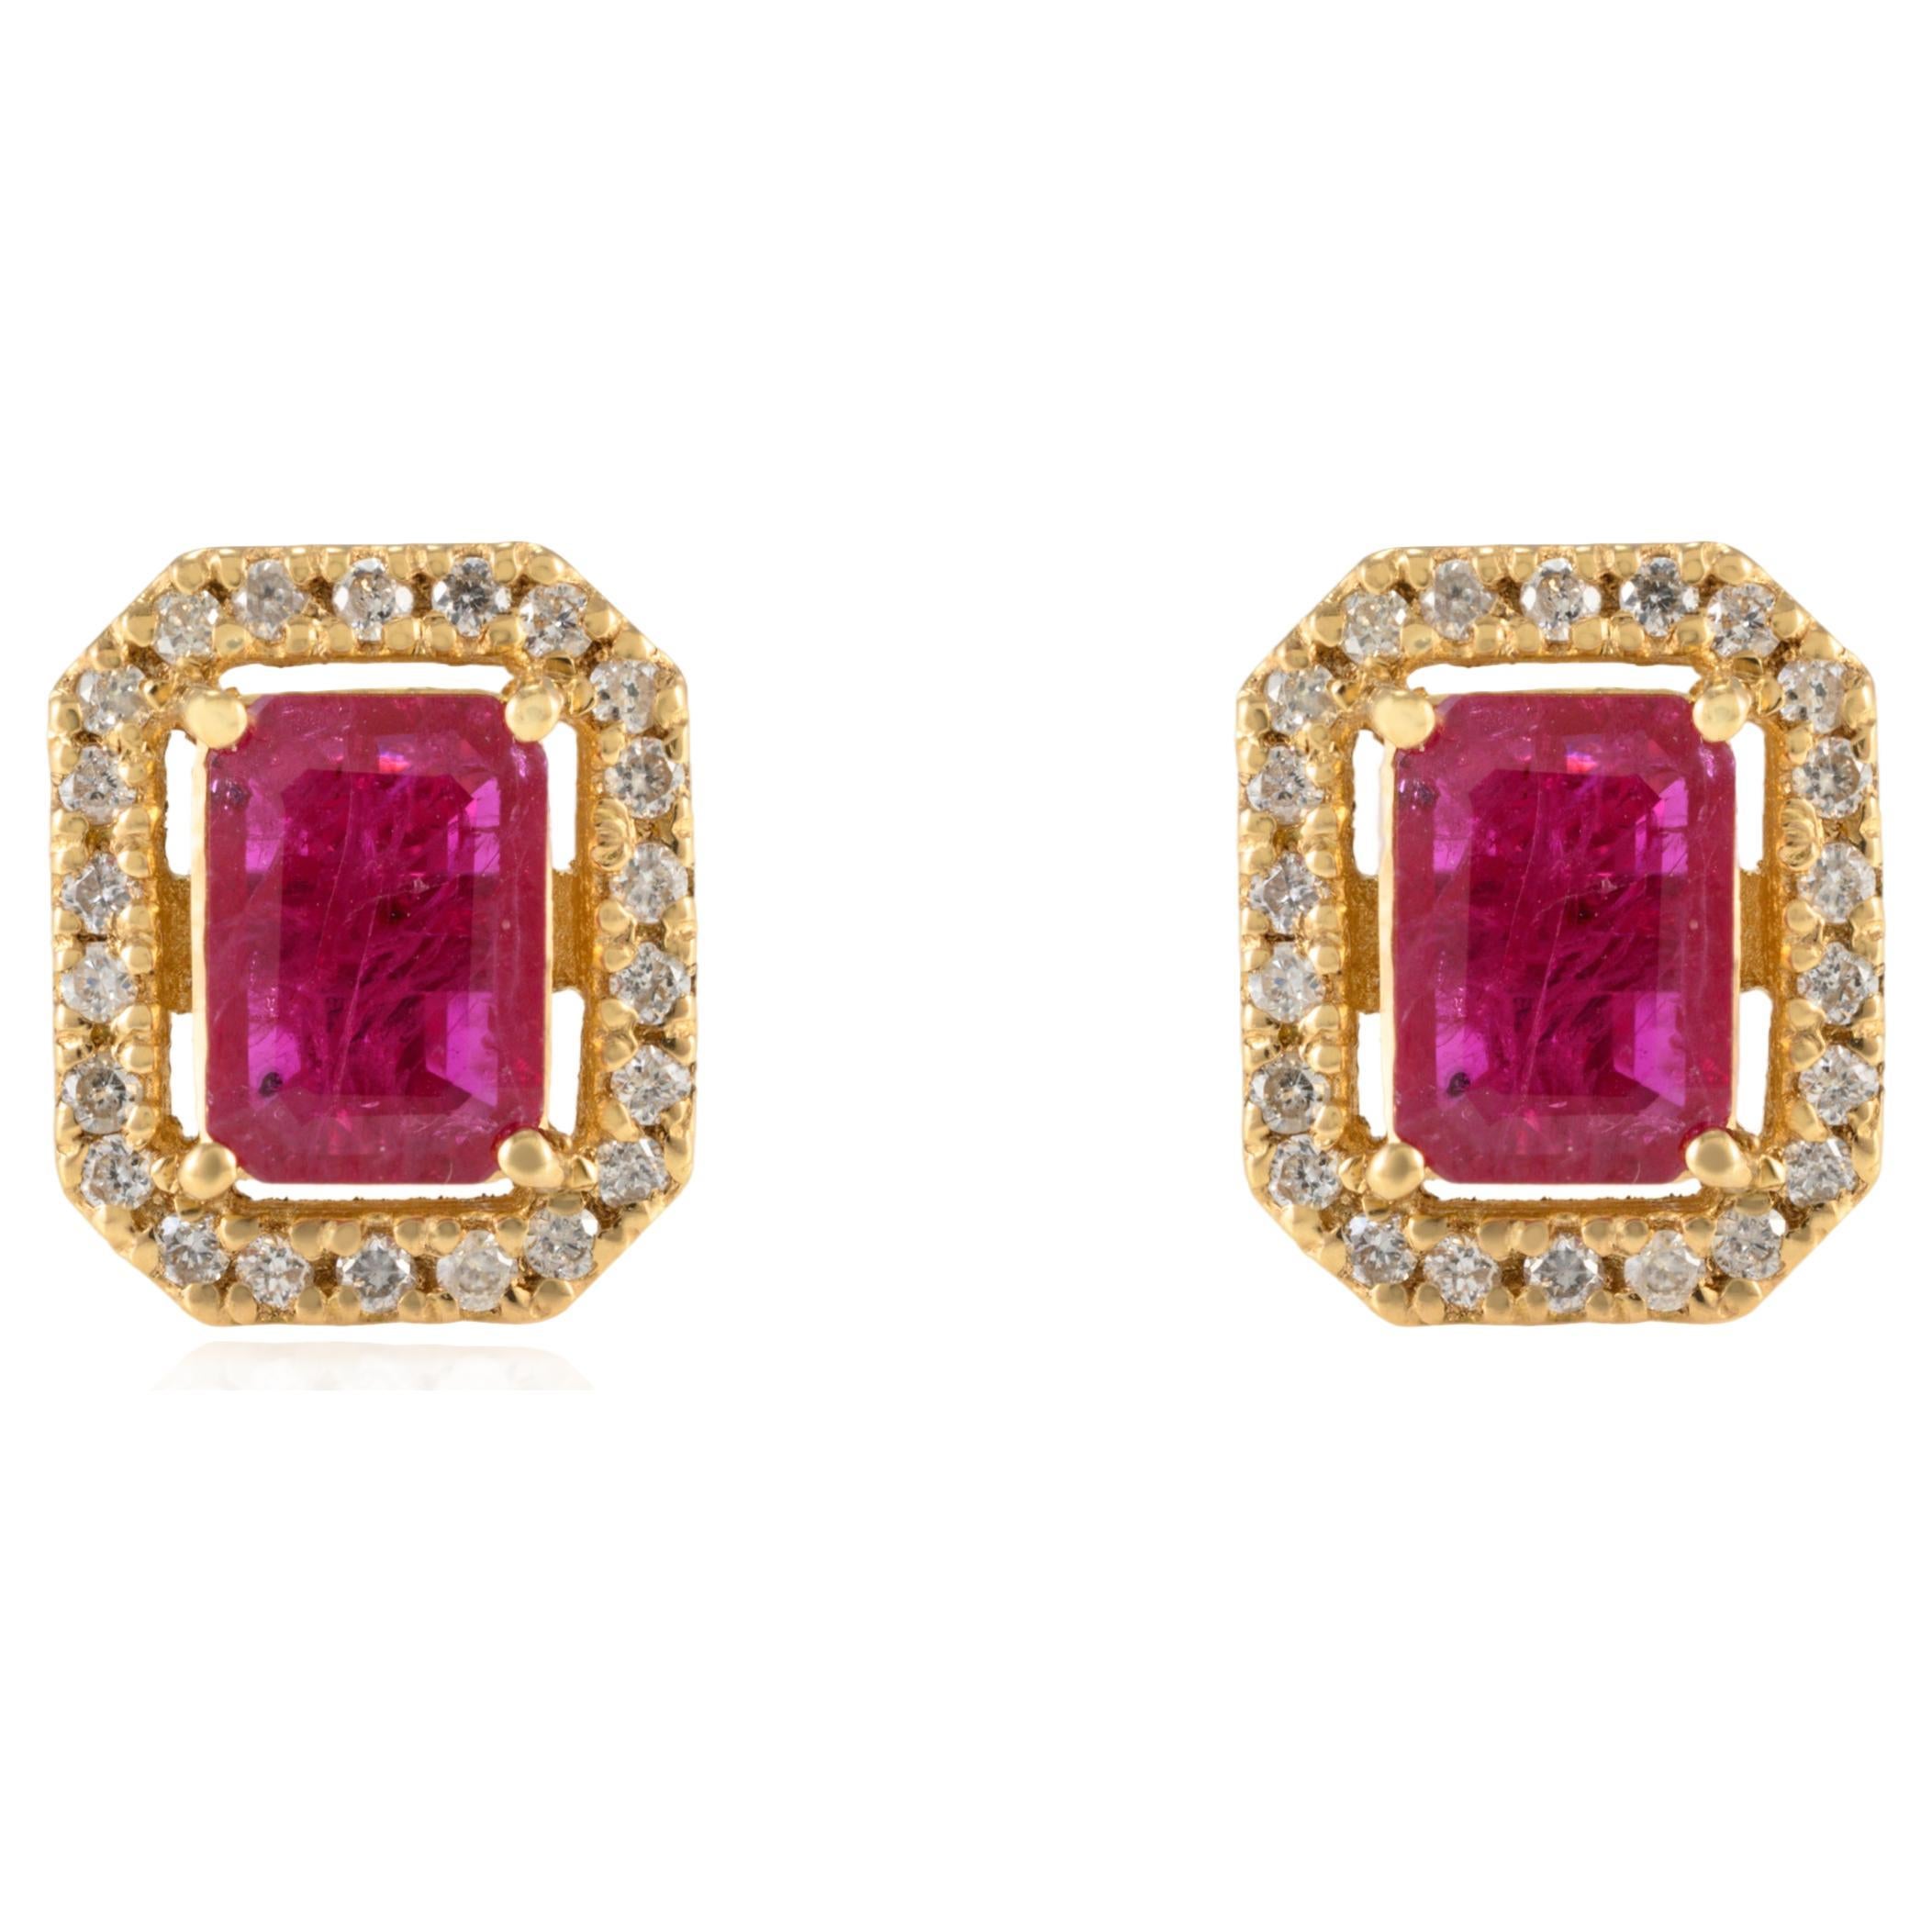 Ruby Halo Diamond Stud Earrings in 18k Solid Yellow Gold Gift For Her